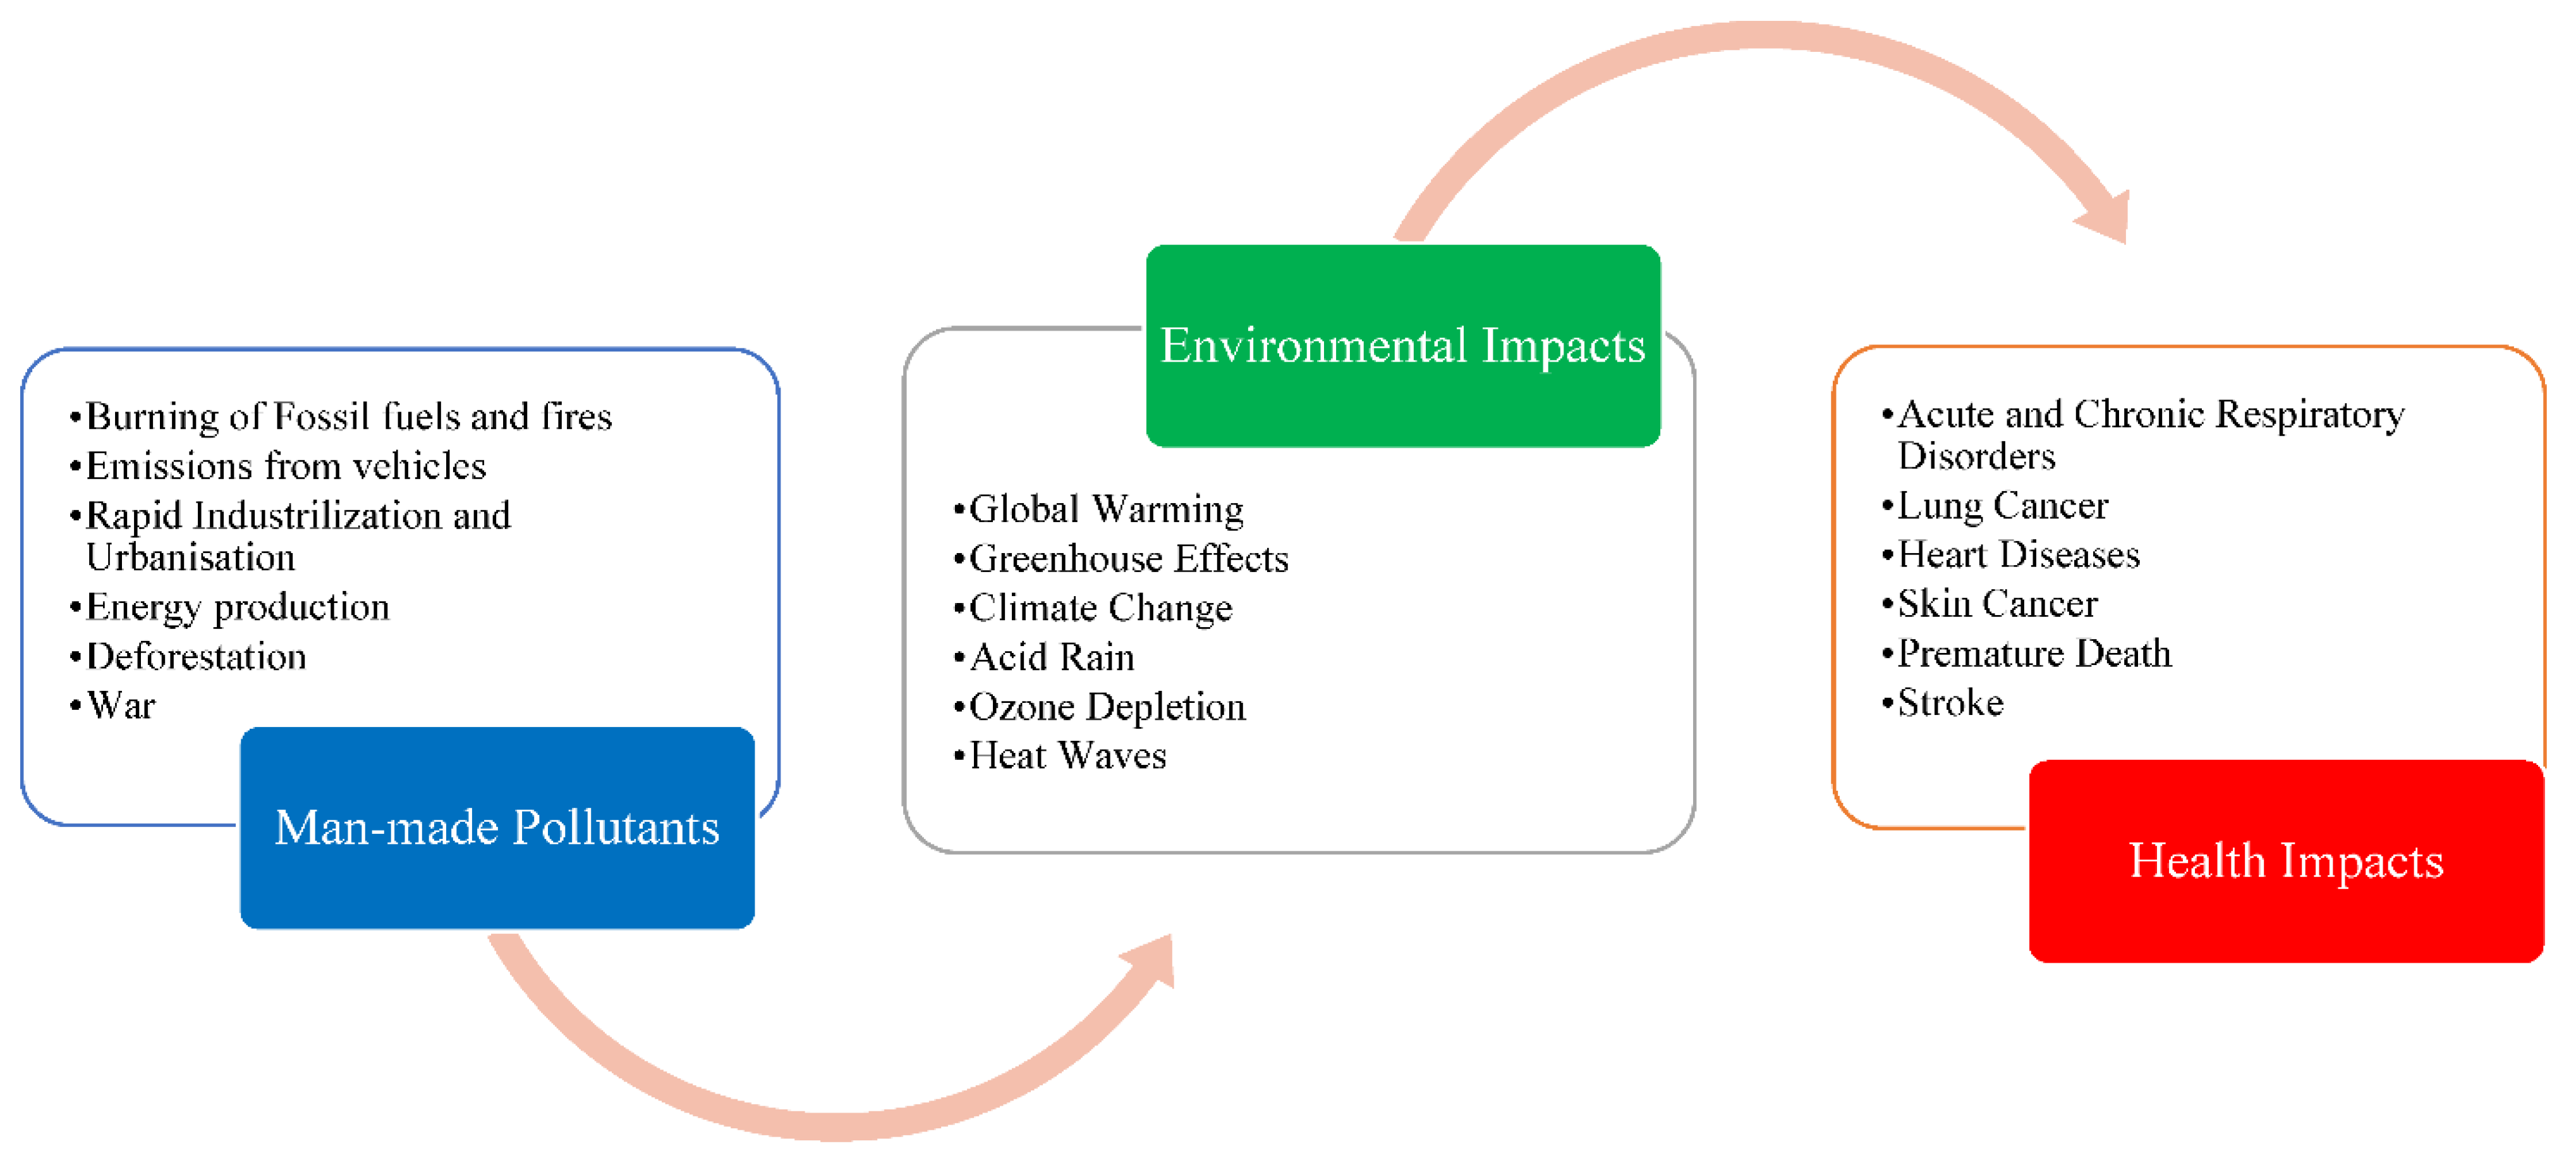 Artificial Intelligence-Based Toxicity Prediction of Environmental